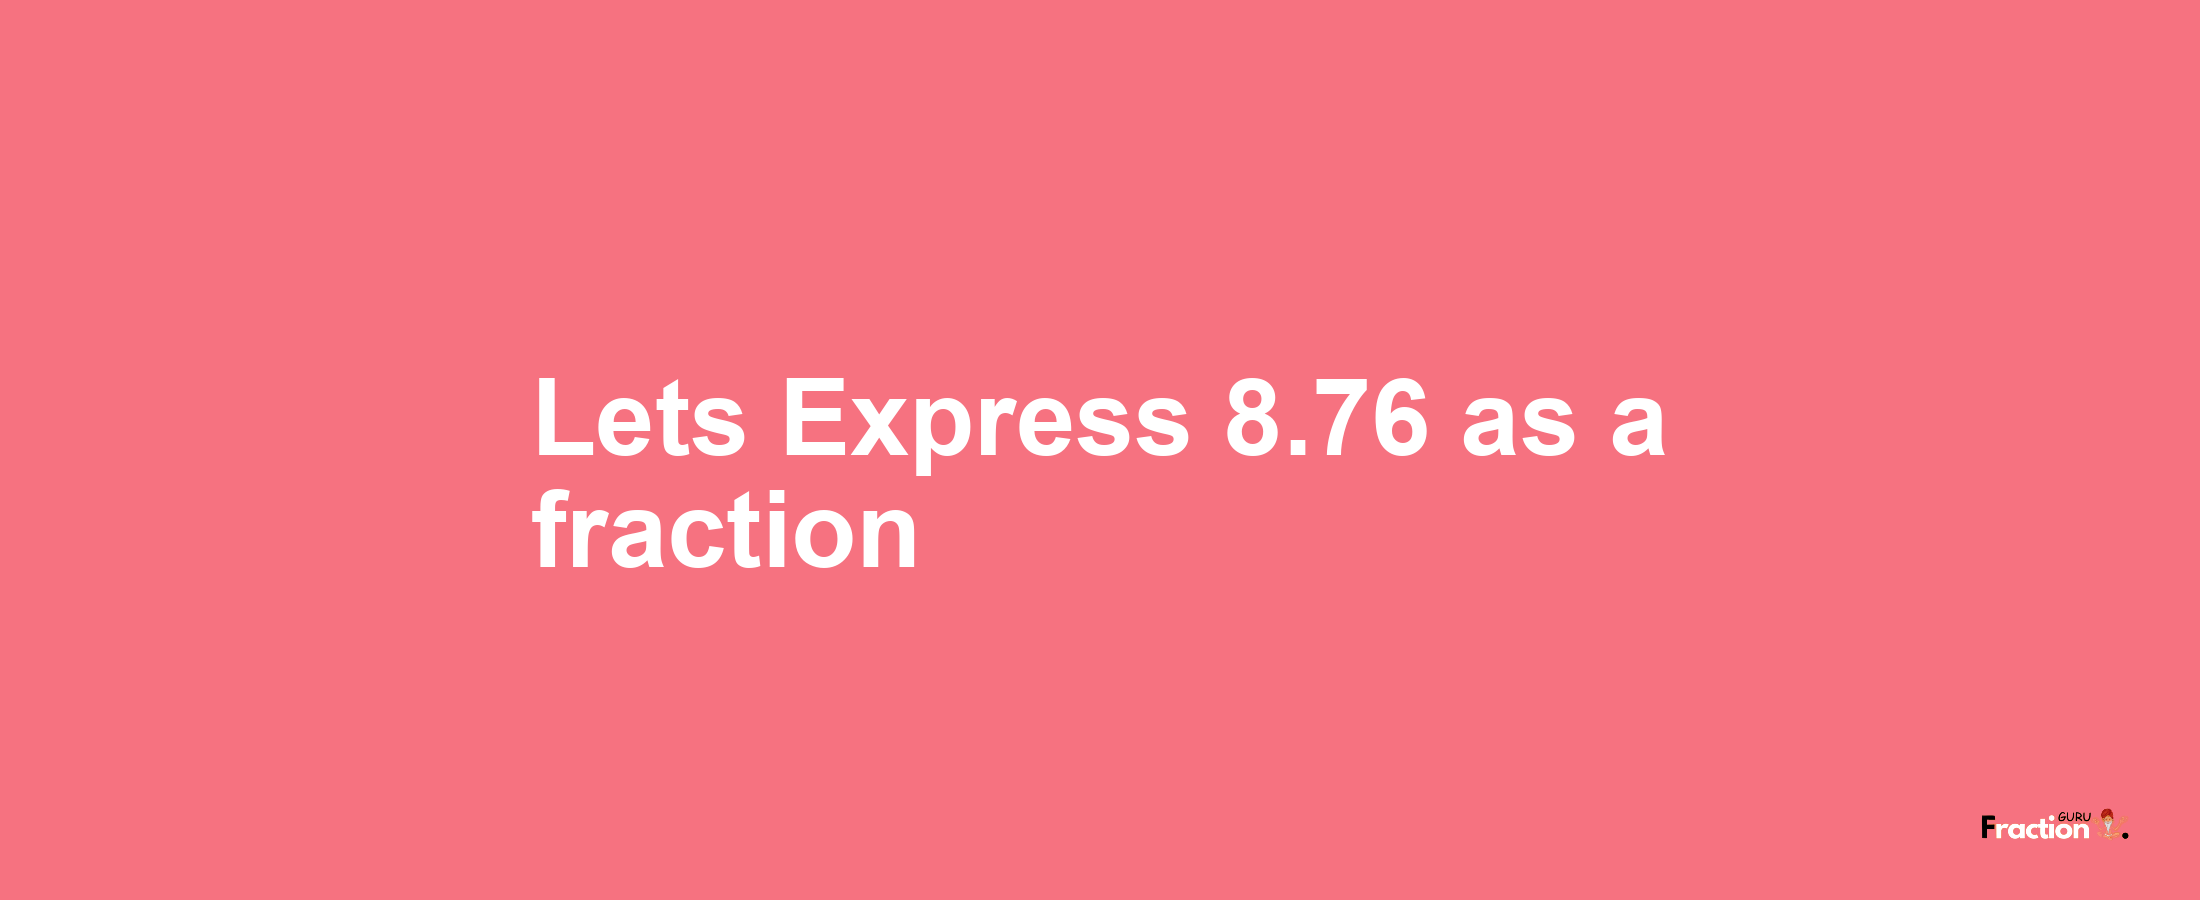 Lets Express 8.76 as afraction